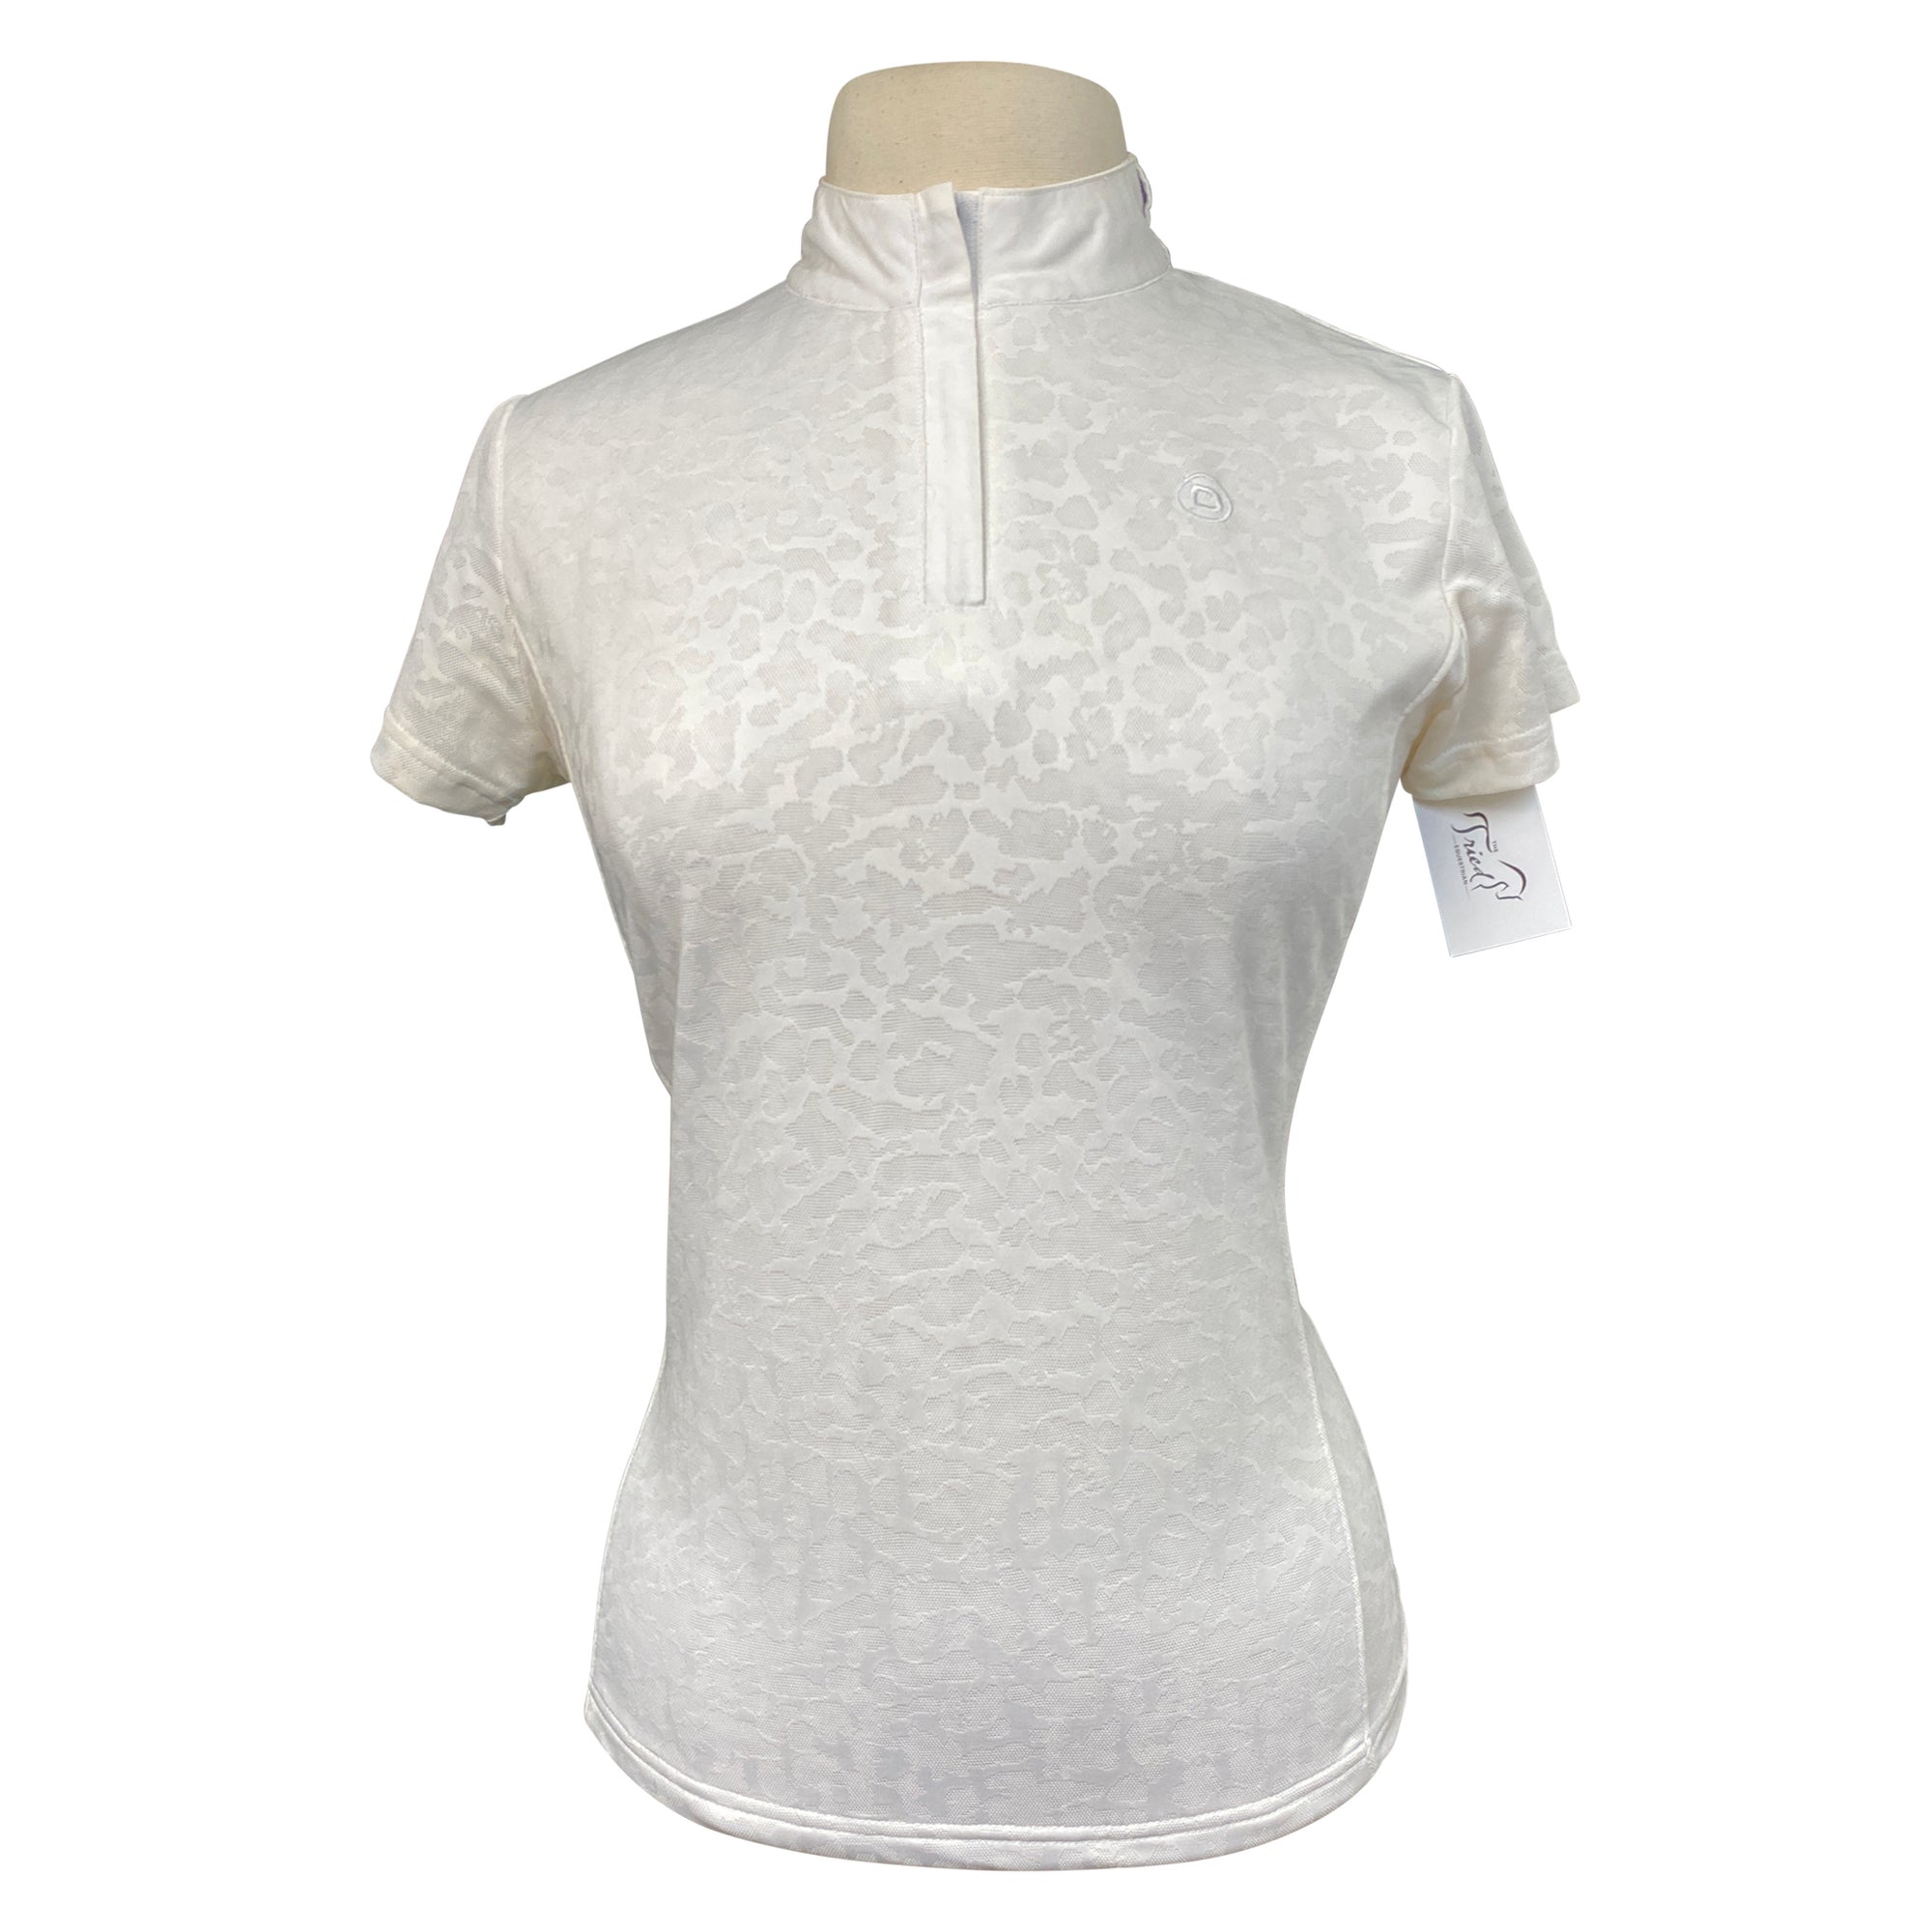 Dublin Lace Vented Short Sleeve Show Shirt in White